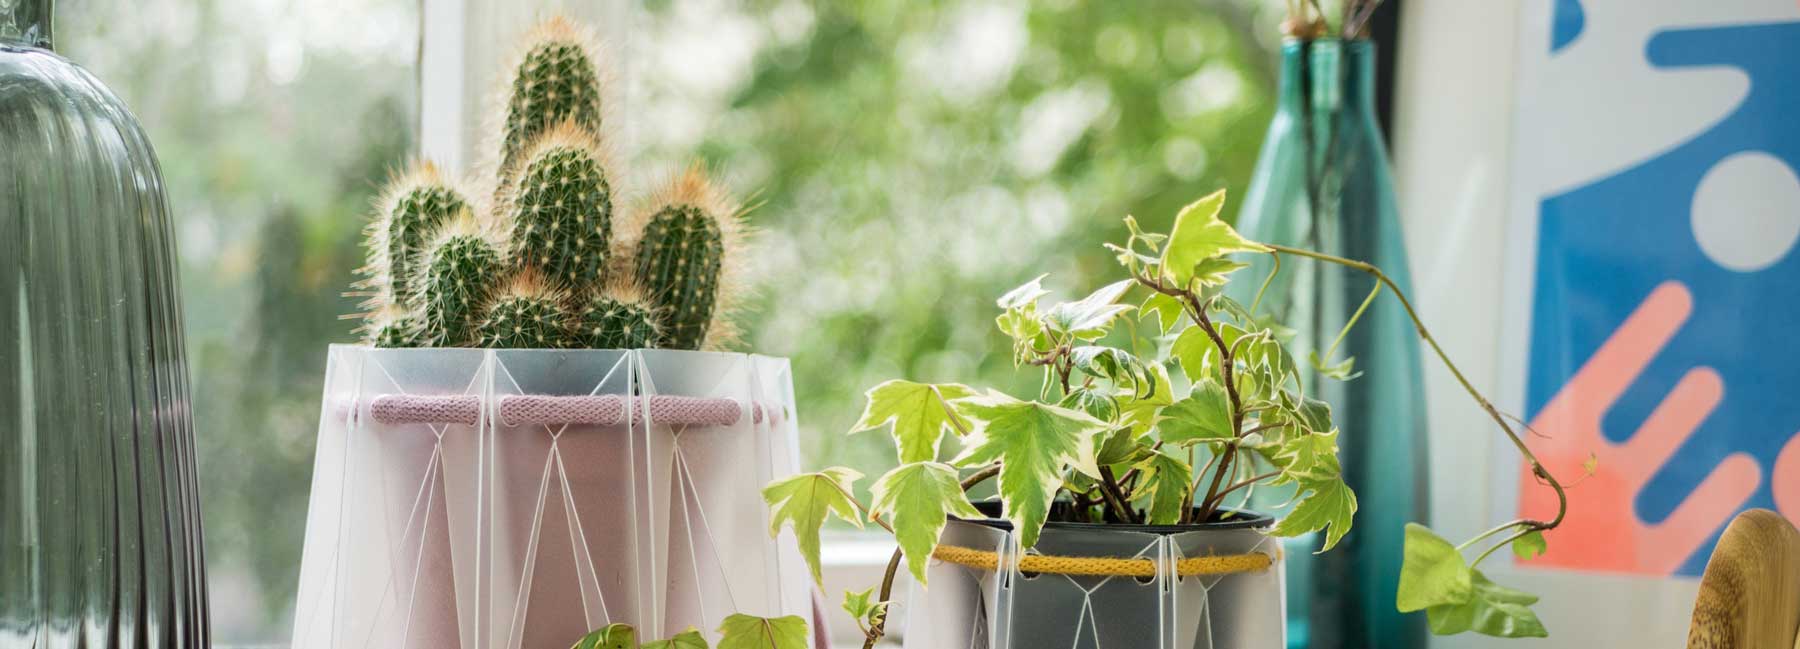 flatpack-origami-potr-plant-pots-are-eco-friendly-water-themselves-designboom-1800